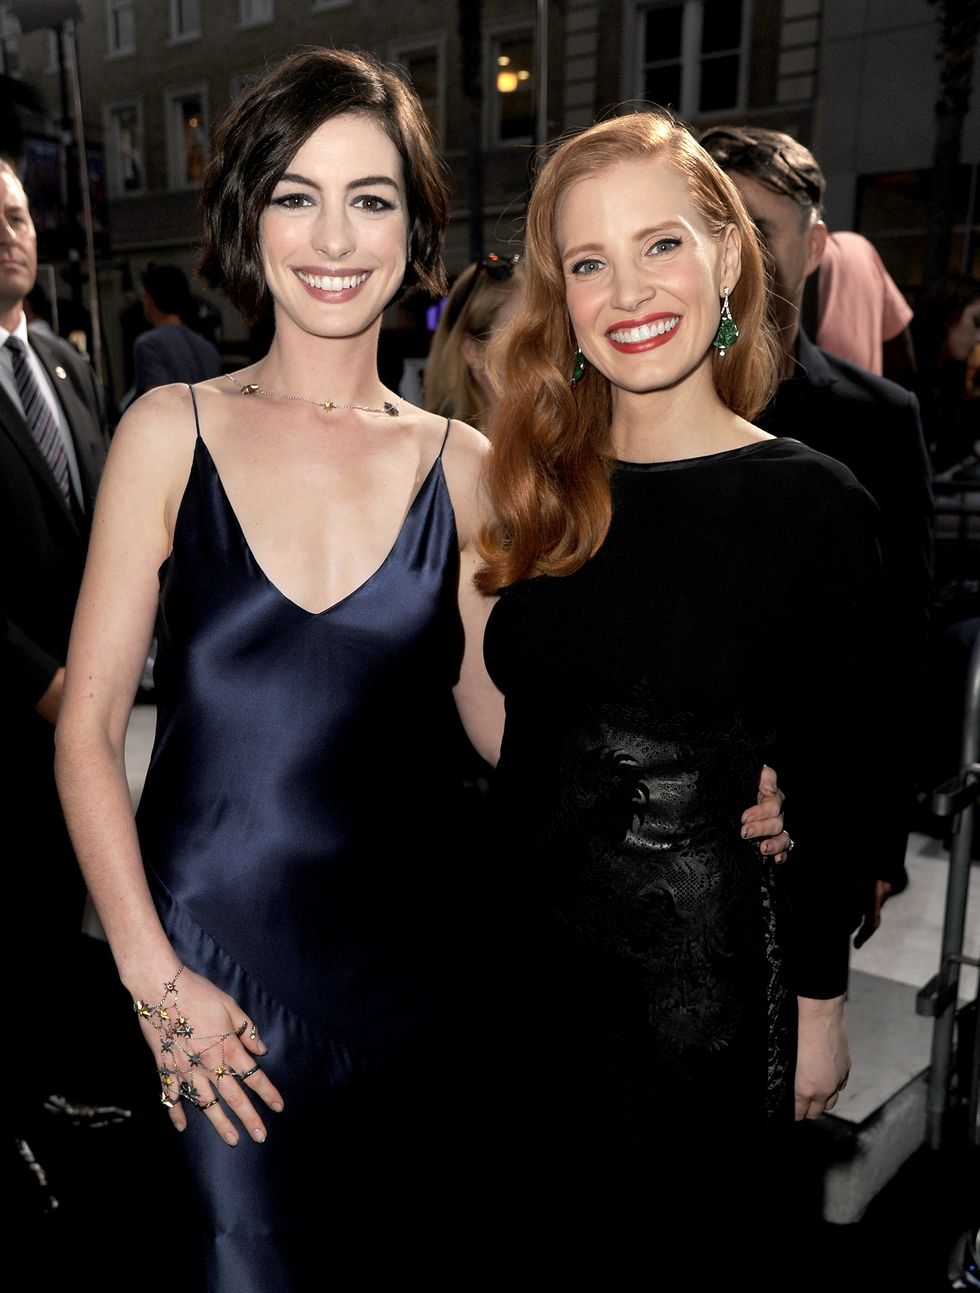 hollywood, ca october 26 actresses anne hathaway l and jessica chastain attend the premiere of paramount pictures interstellar at tcl chinese theatre imax on october 26, 2014 in hollywood, california photo by kevin wintergetty images